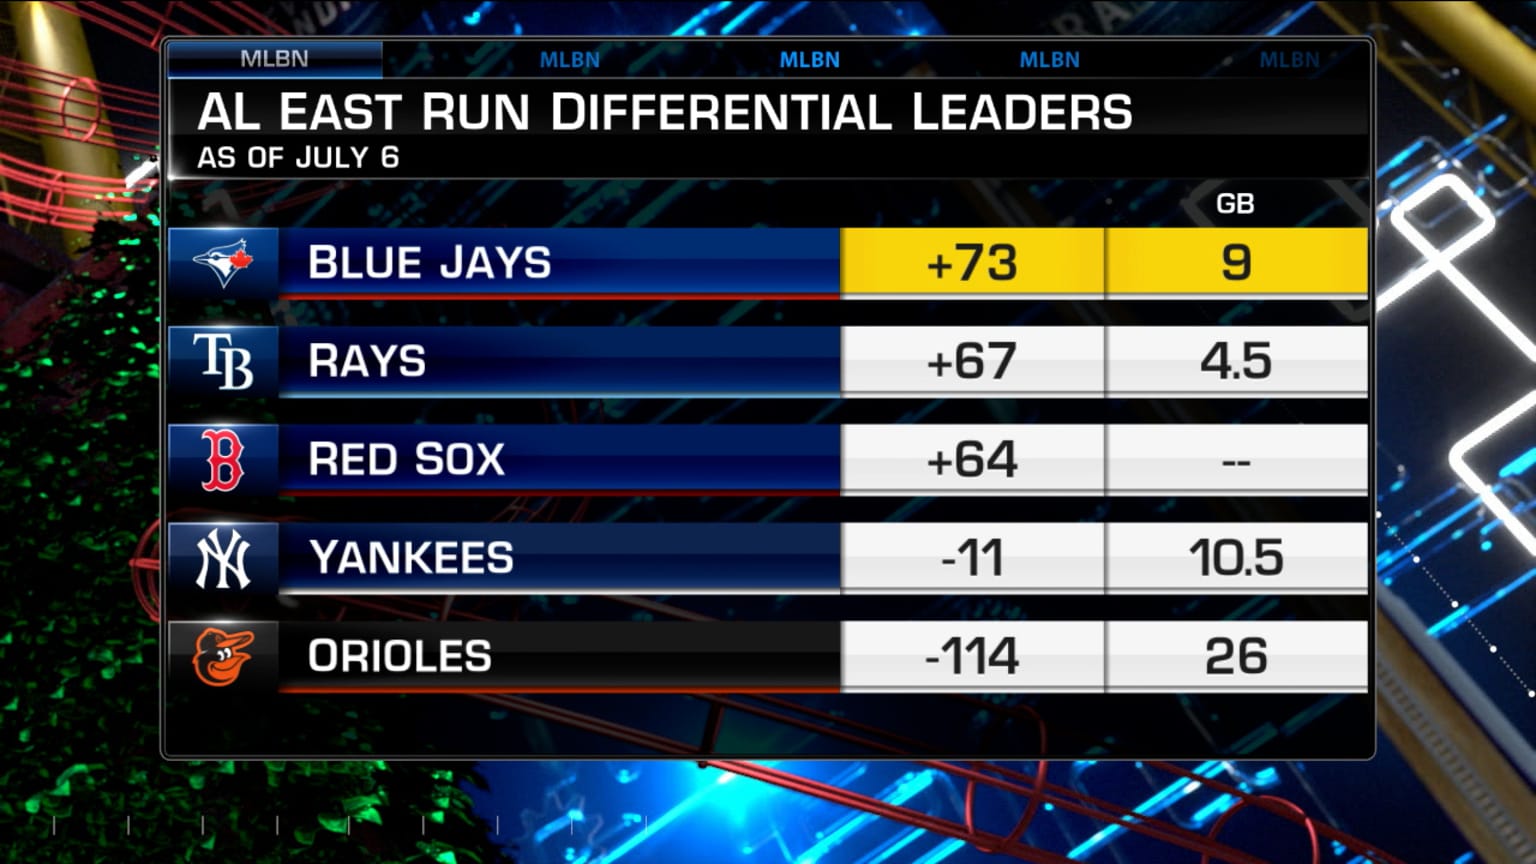 MLB Standings Based on Run Differential